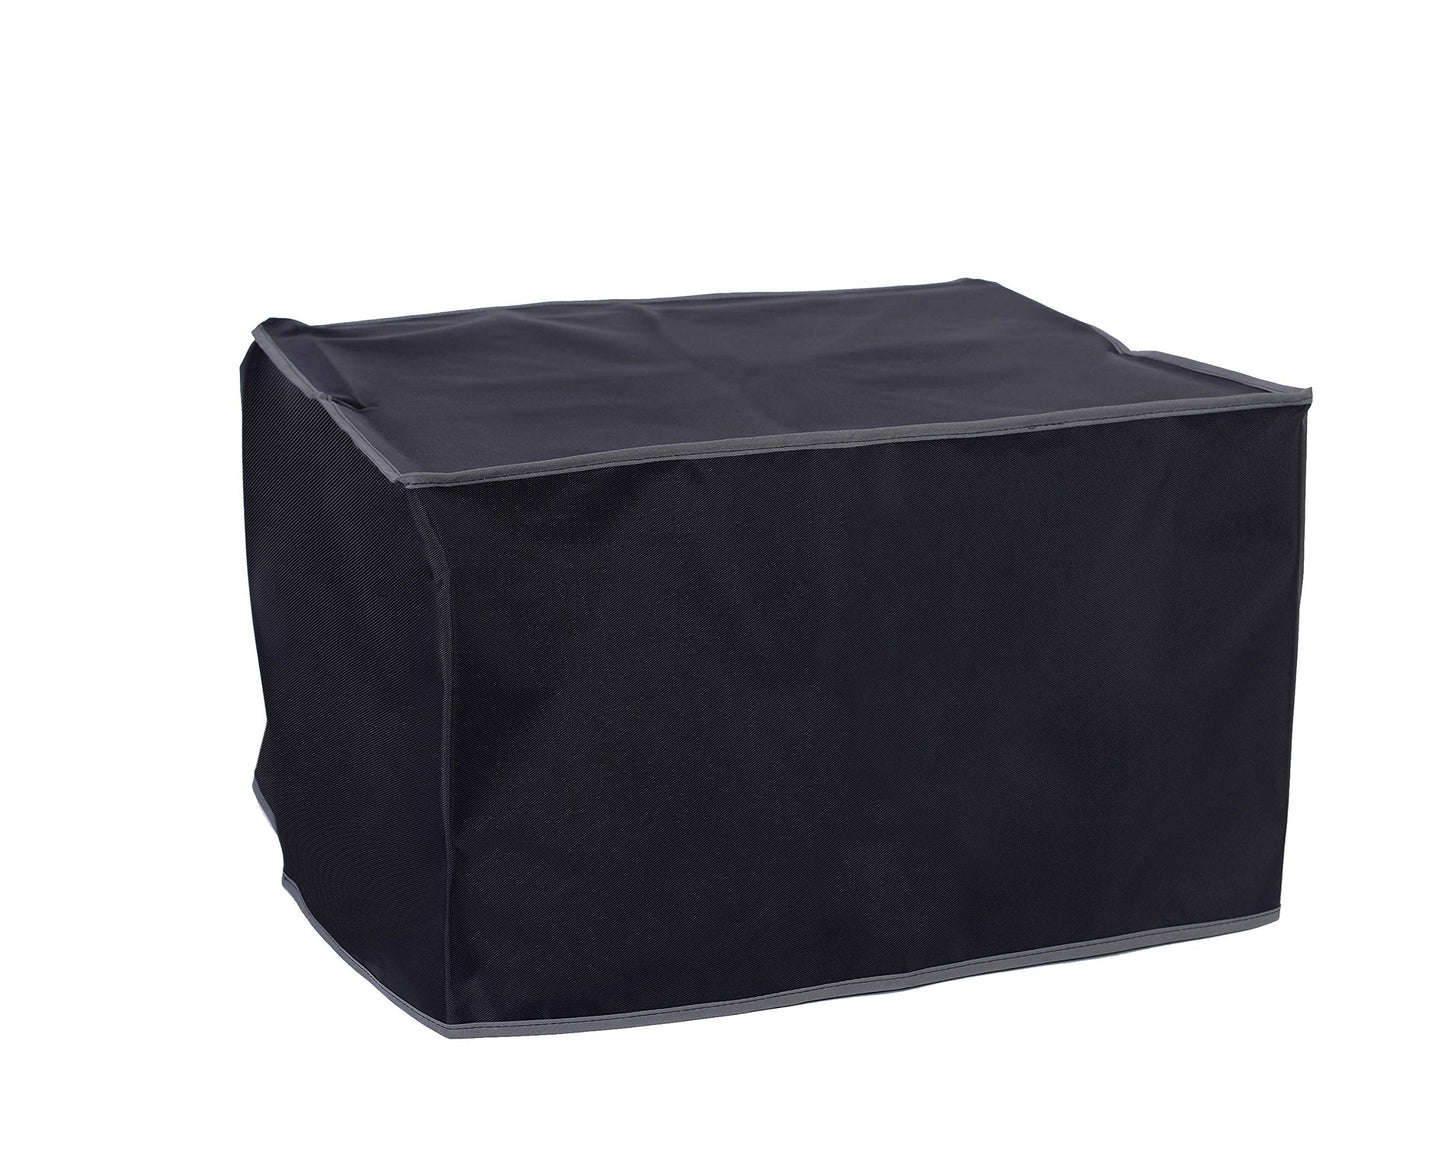 The Perfect Dust Cover, Black Nylon Cover for Epson SureColor P6000 24'' Large Format Inkjet Printer, Anti Static and Waterproof Cover Dimensions 54''W x 26''D x 48''H by The Perfect Dust Cover LLC